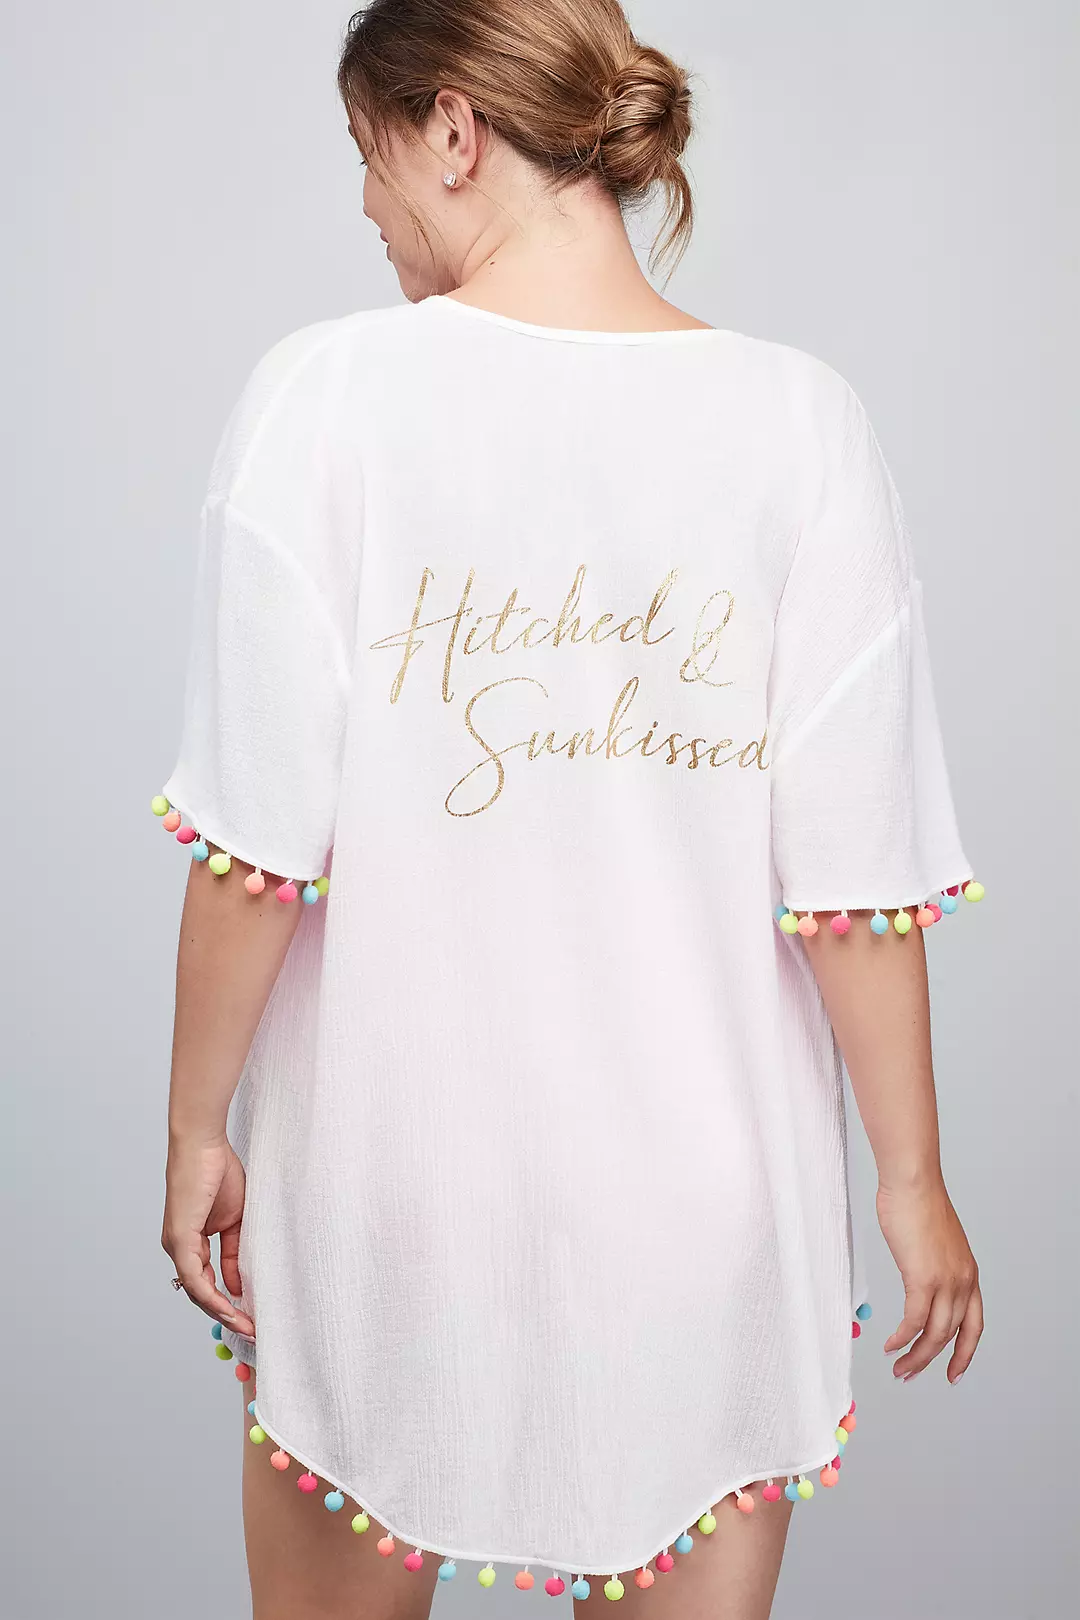 Hitched and Sunkissed Pom Pom Kimono Pool Cover Up Image